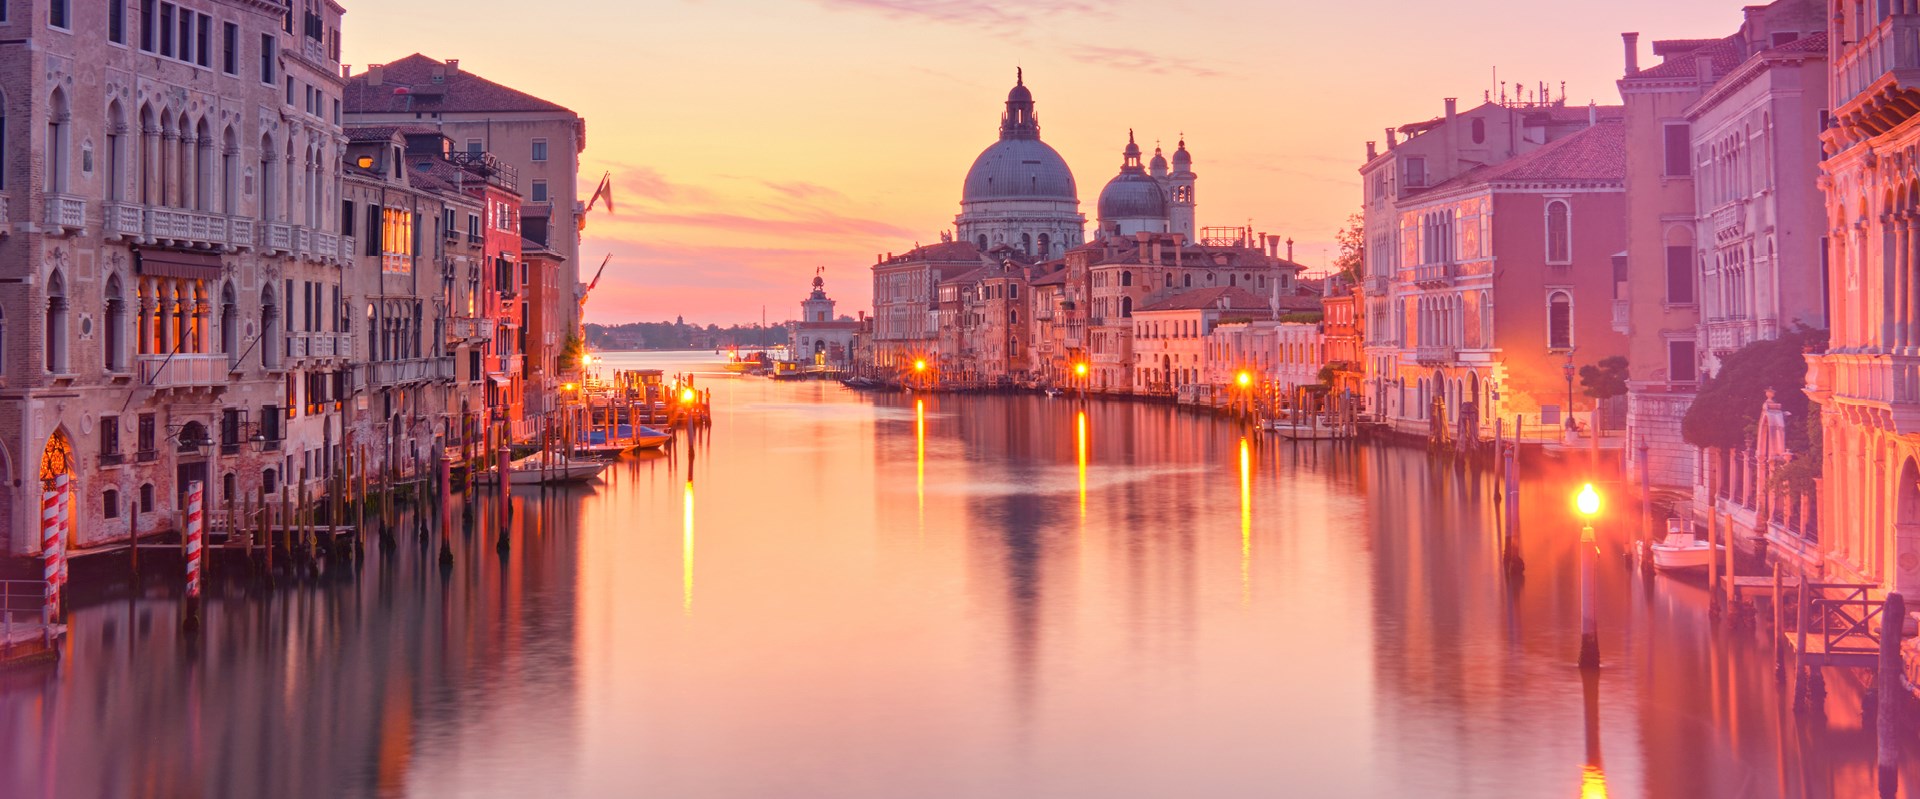 DISCOVER OUR NEW VENICE ITINERARY